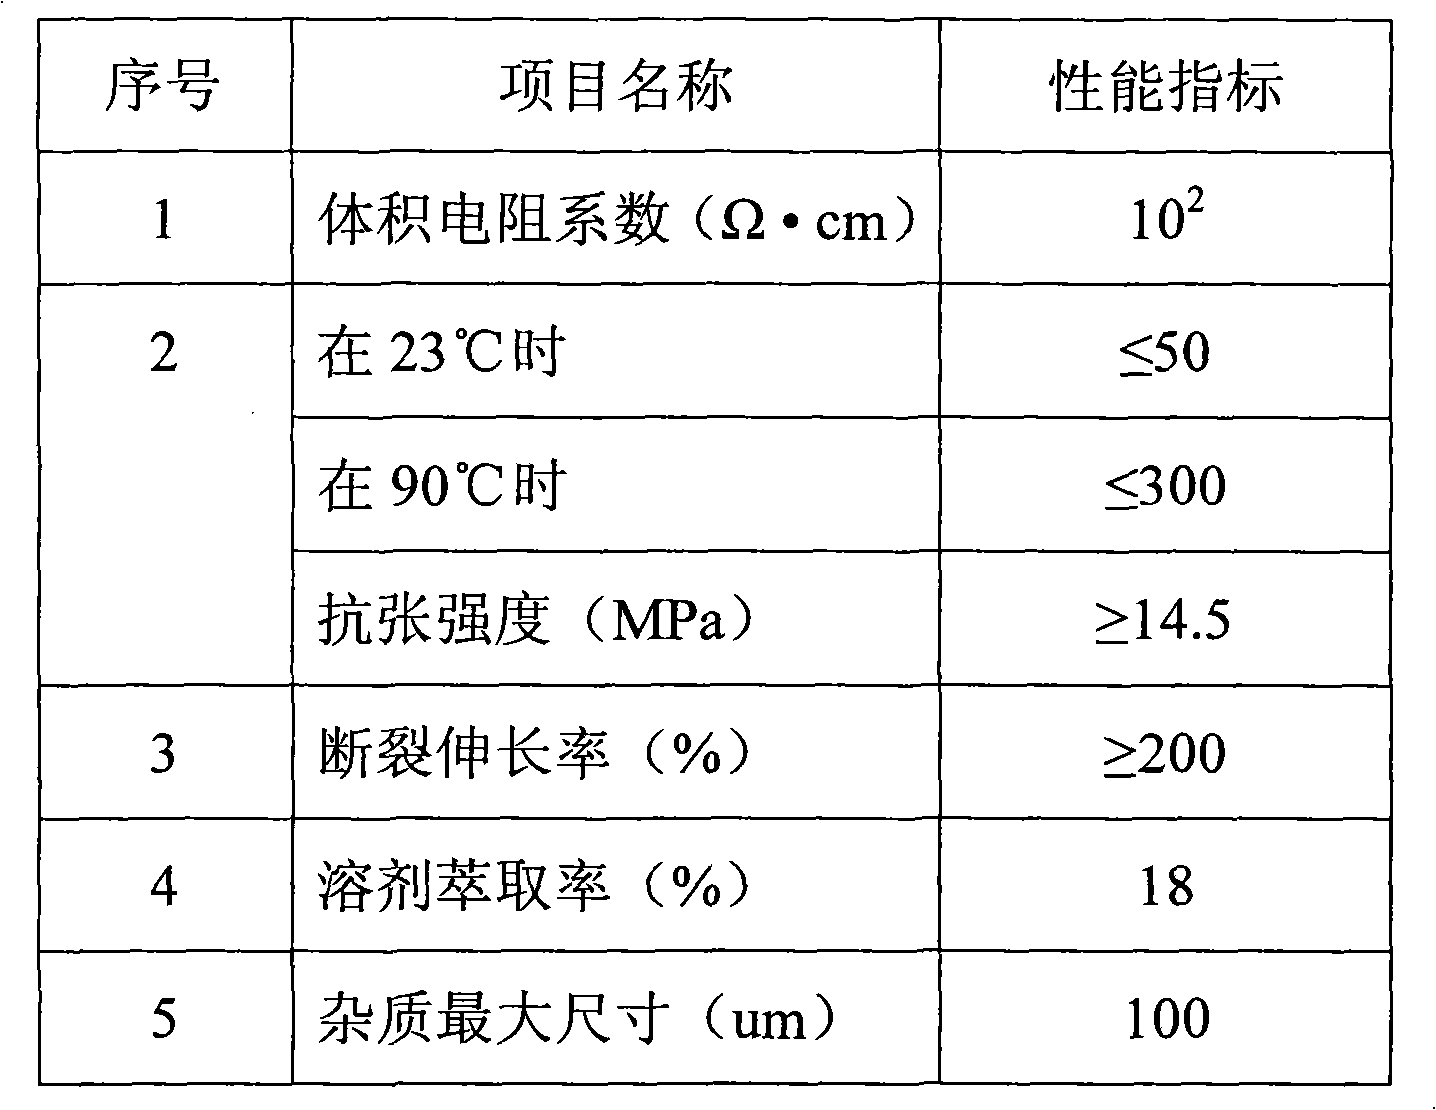 Preparation method of semiconductive shielding material for 110kV and above voltage class cables